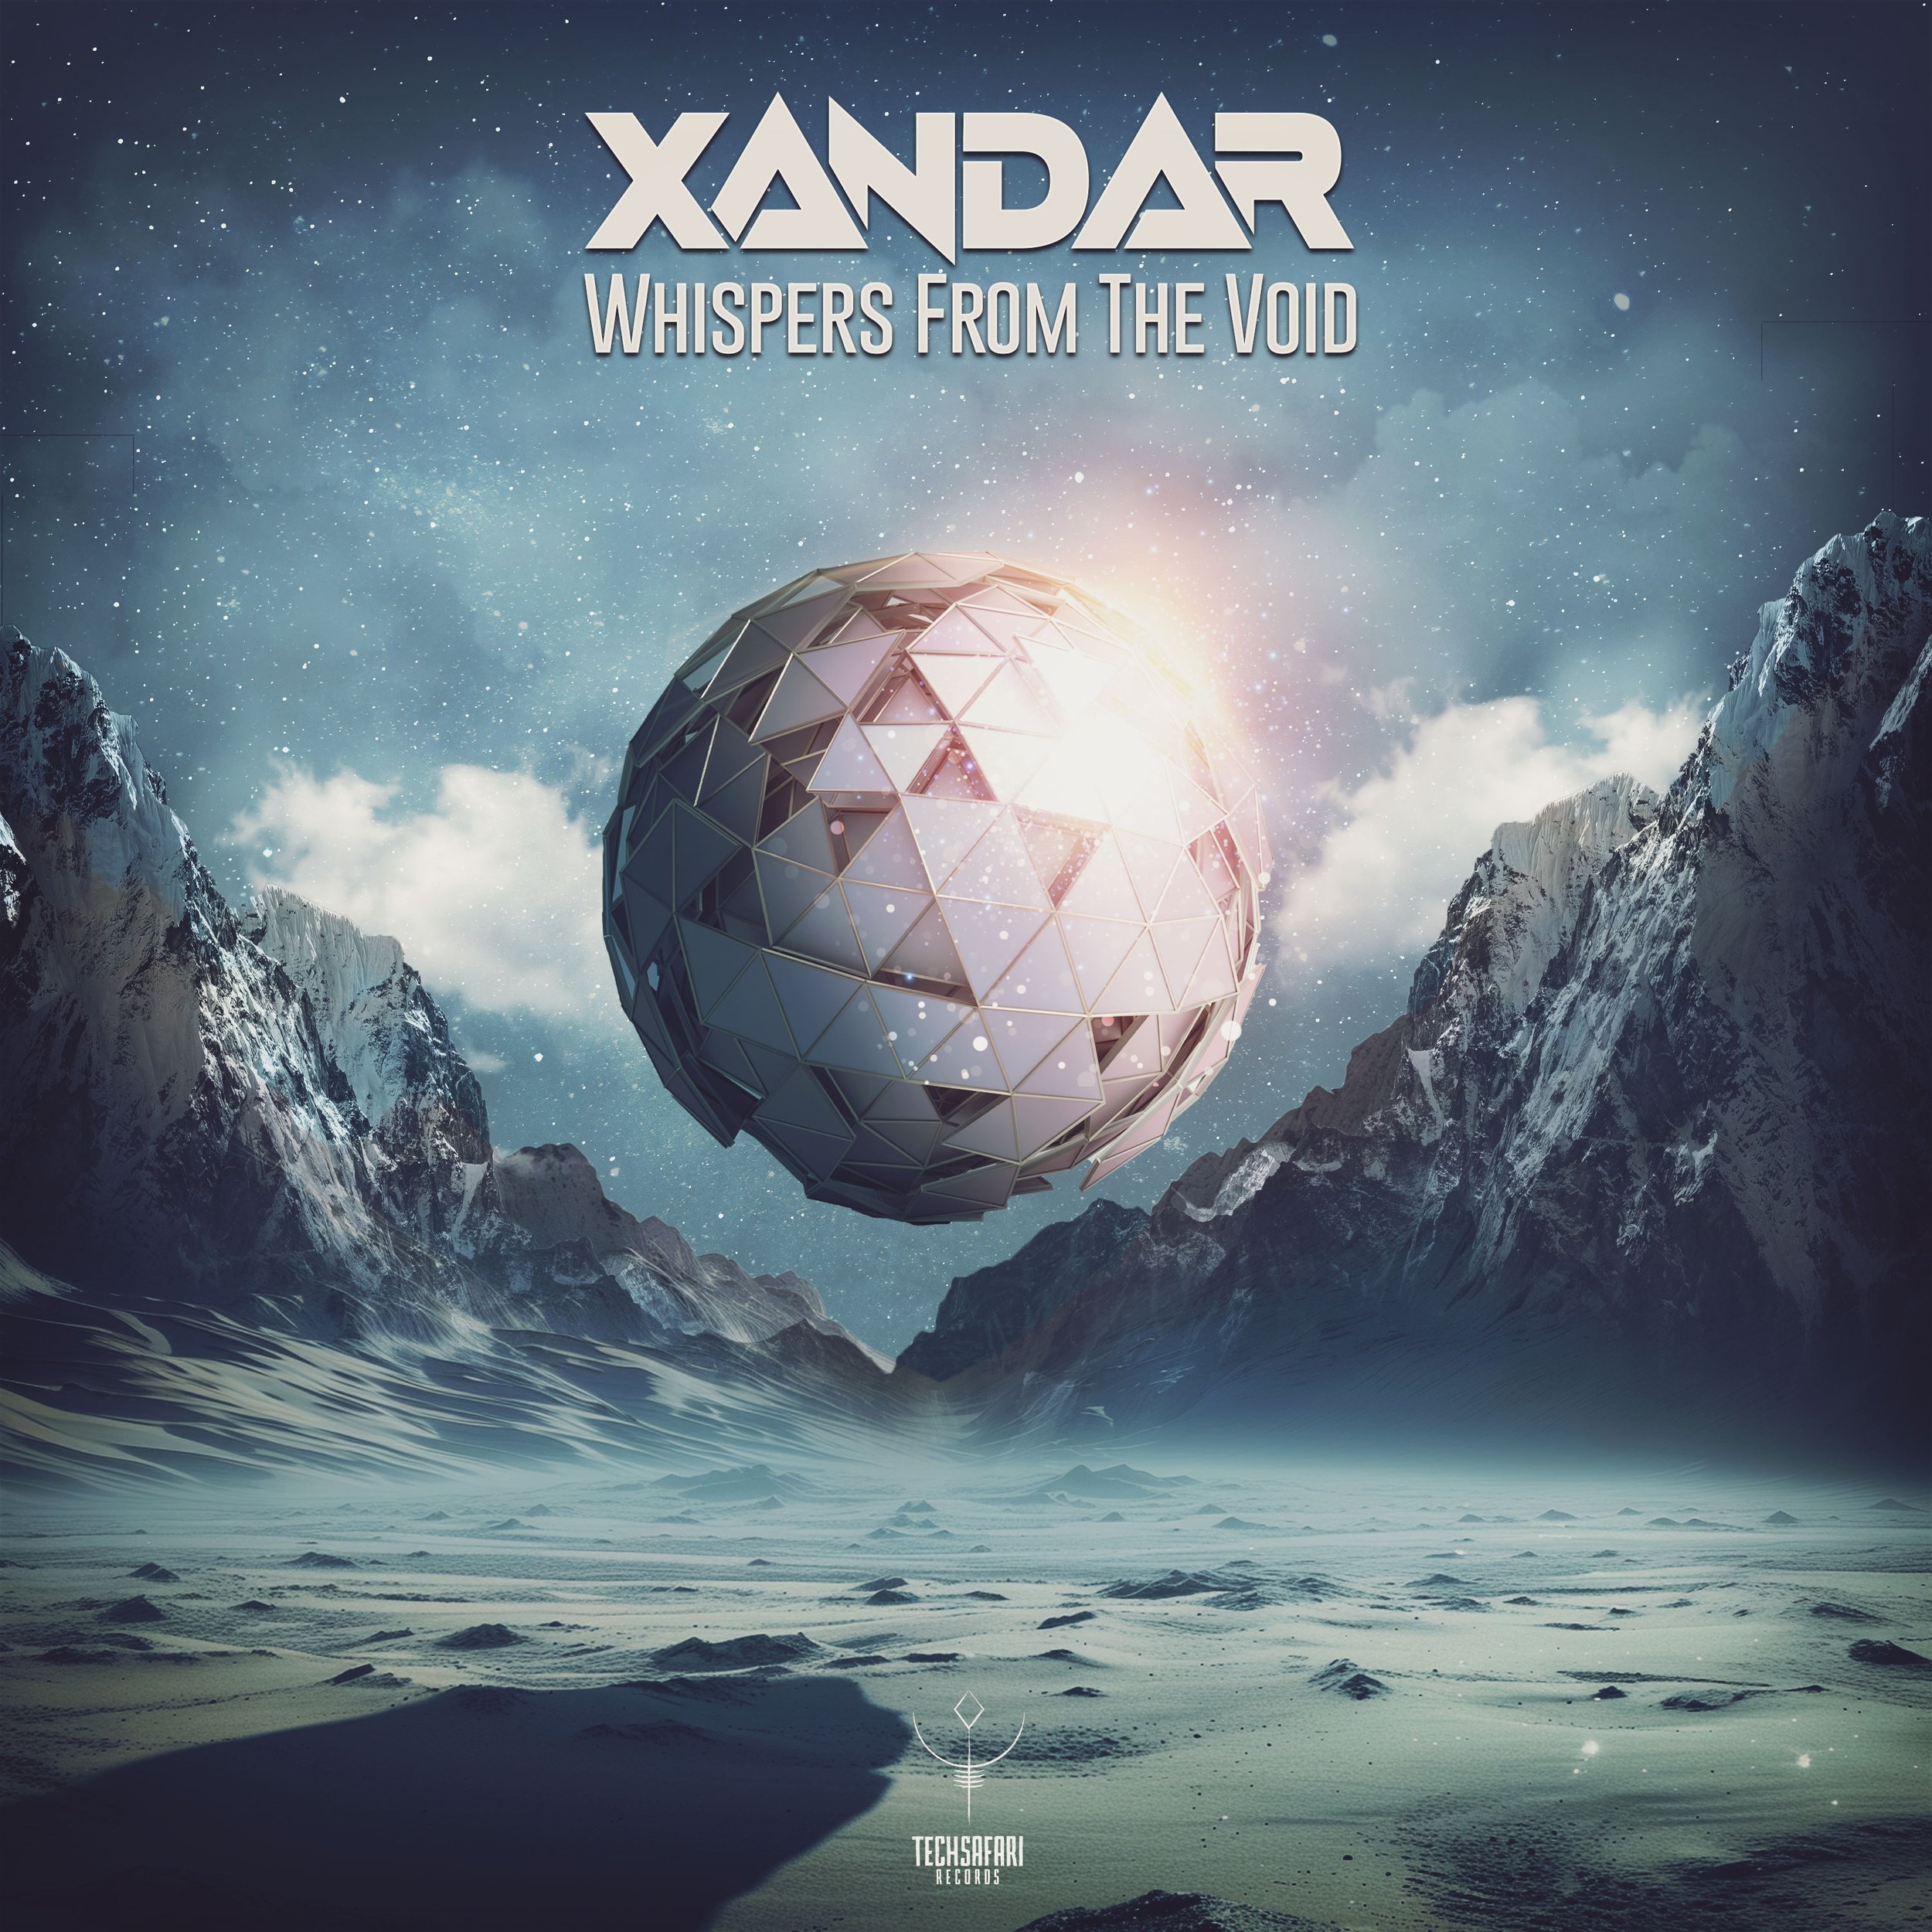 Xandar - Whispers from the Void